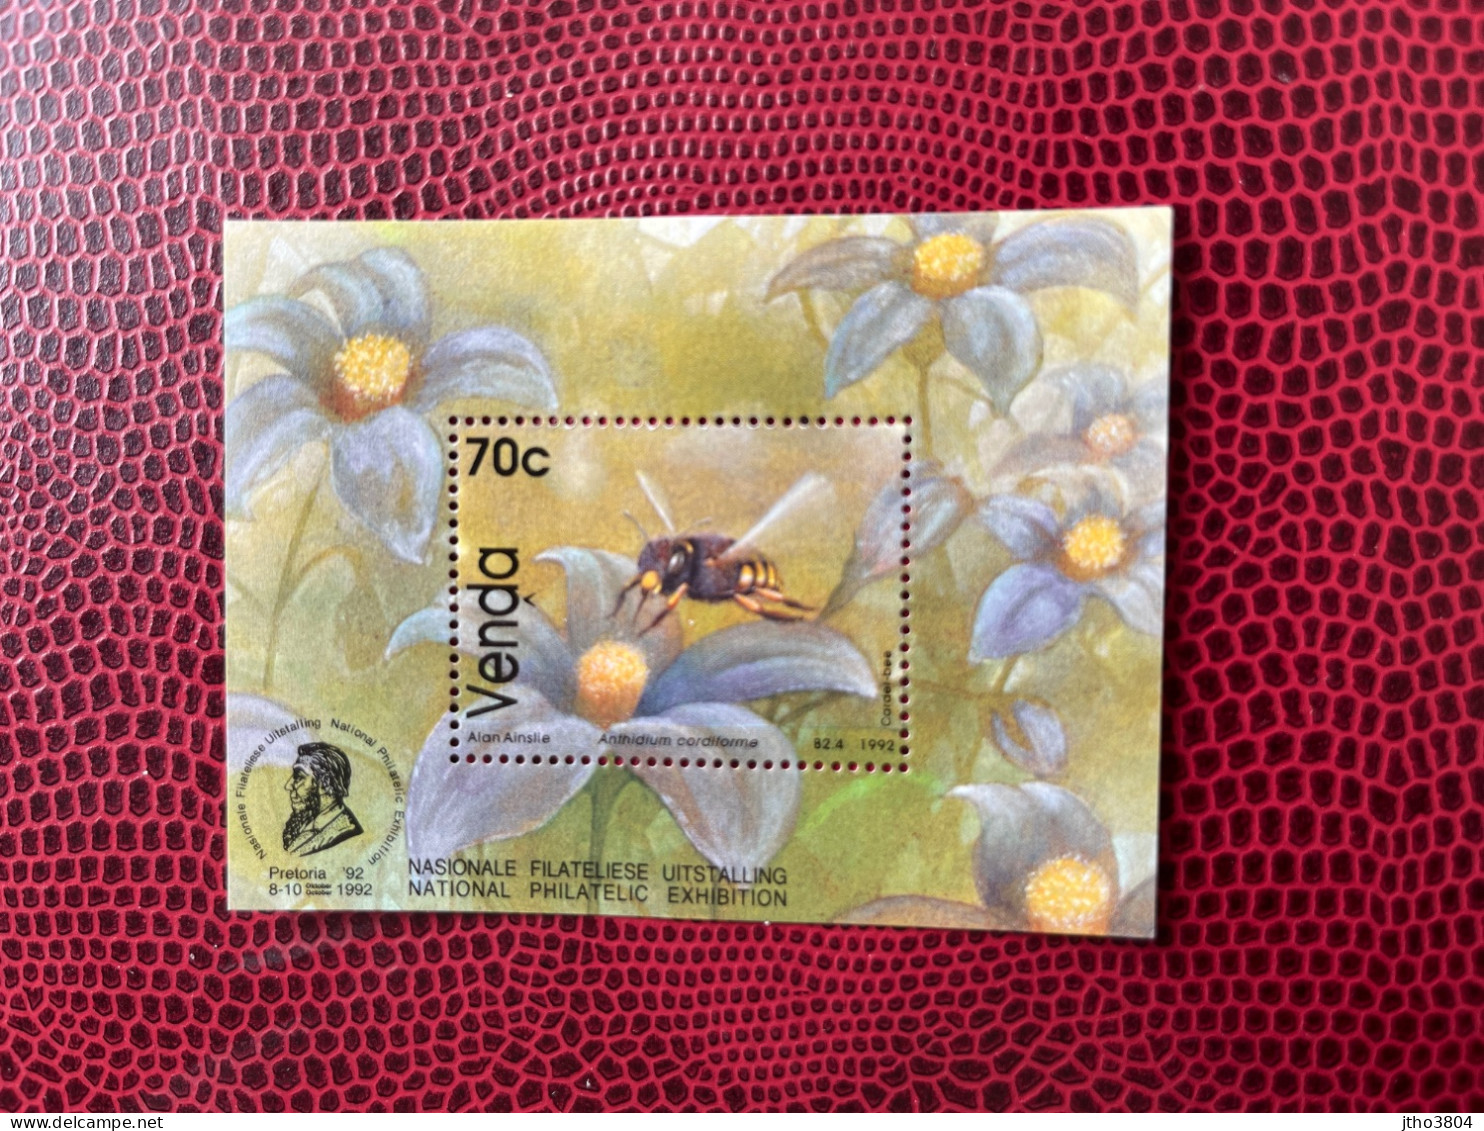 Transkei Venda 1992 SUD AFRICAIN BL 1v Neuf MNH ** Mi BL8 YT Insecte Abeja Insect Bee Insekt Biene SOUTH WEST AFRICA - Abeilles